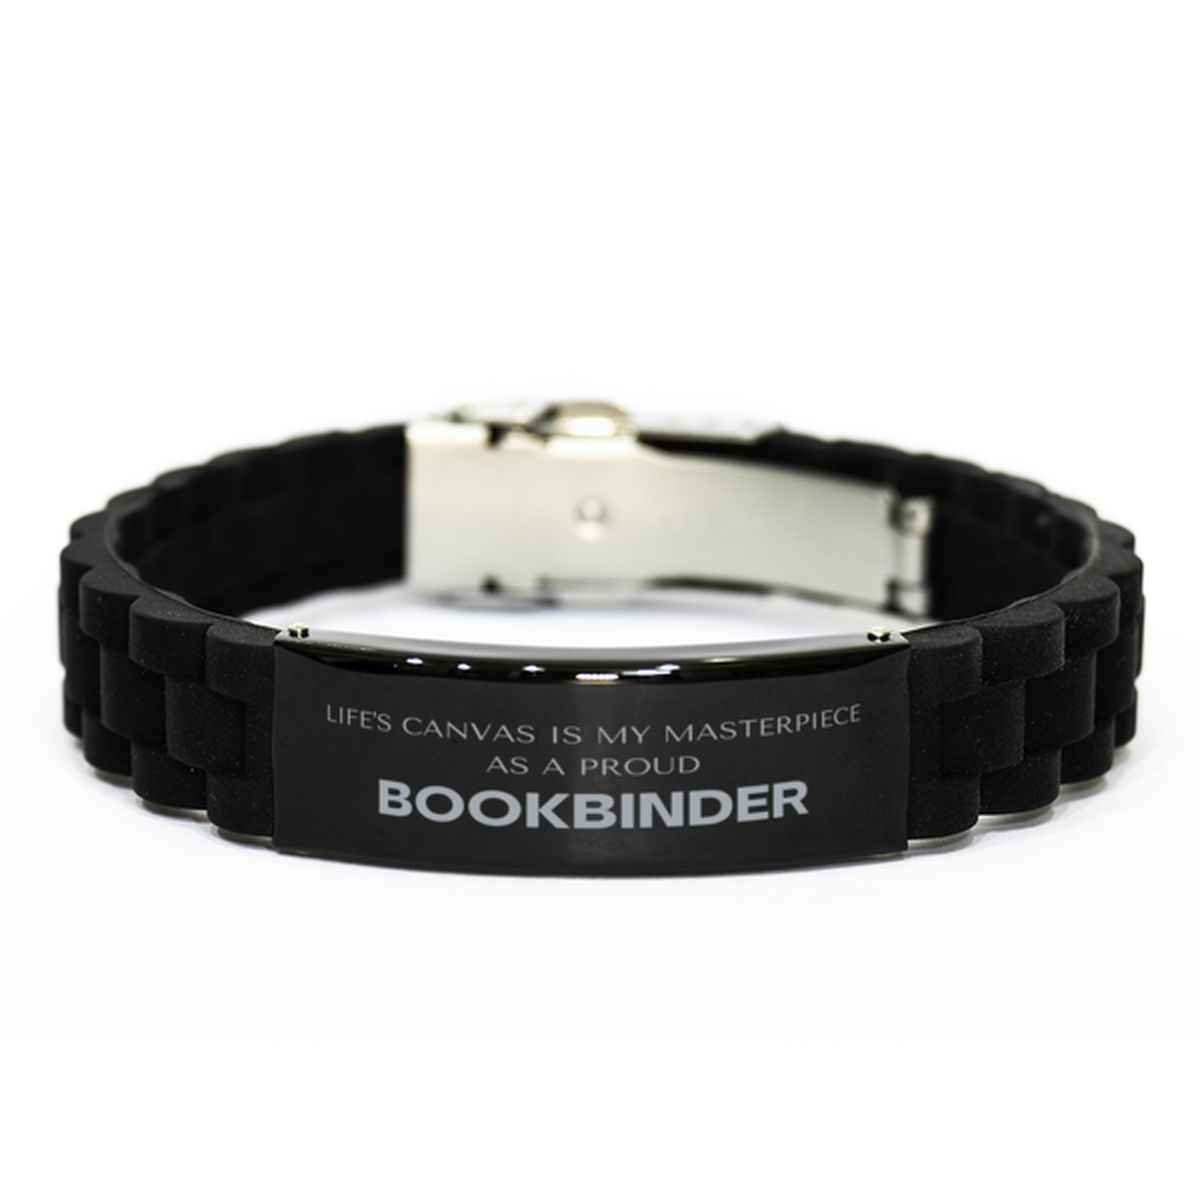 Proud Bookbinder Gifts, Life's canvas is my masterpiece, Epic Birthday Christmas Unique Black Glidelock Clasp Bracelet For Bookbinder, Coworkers, Men, Women, Friends